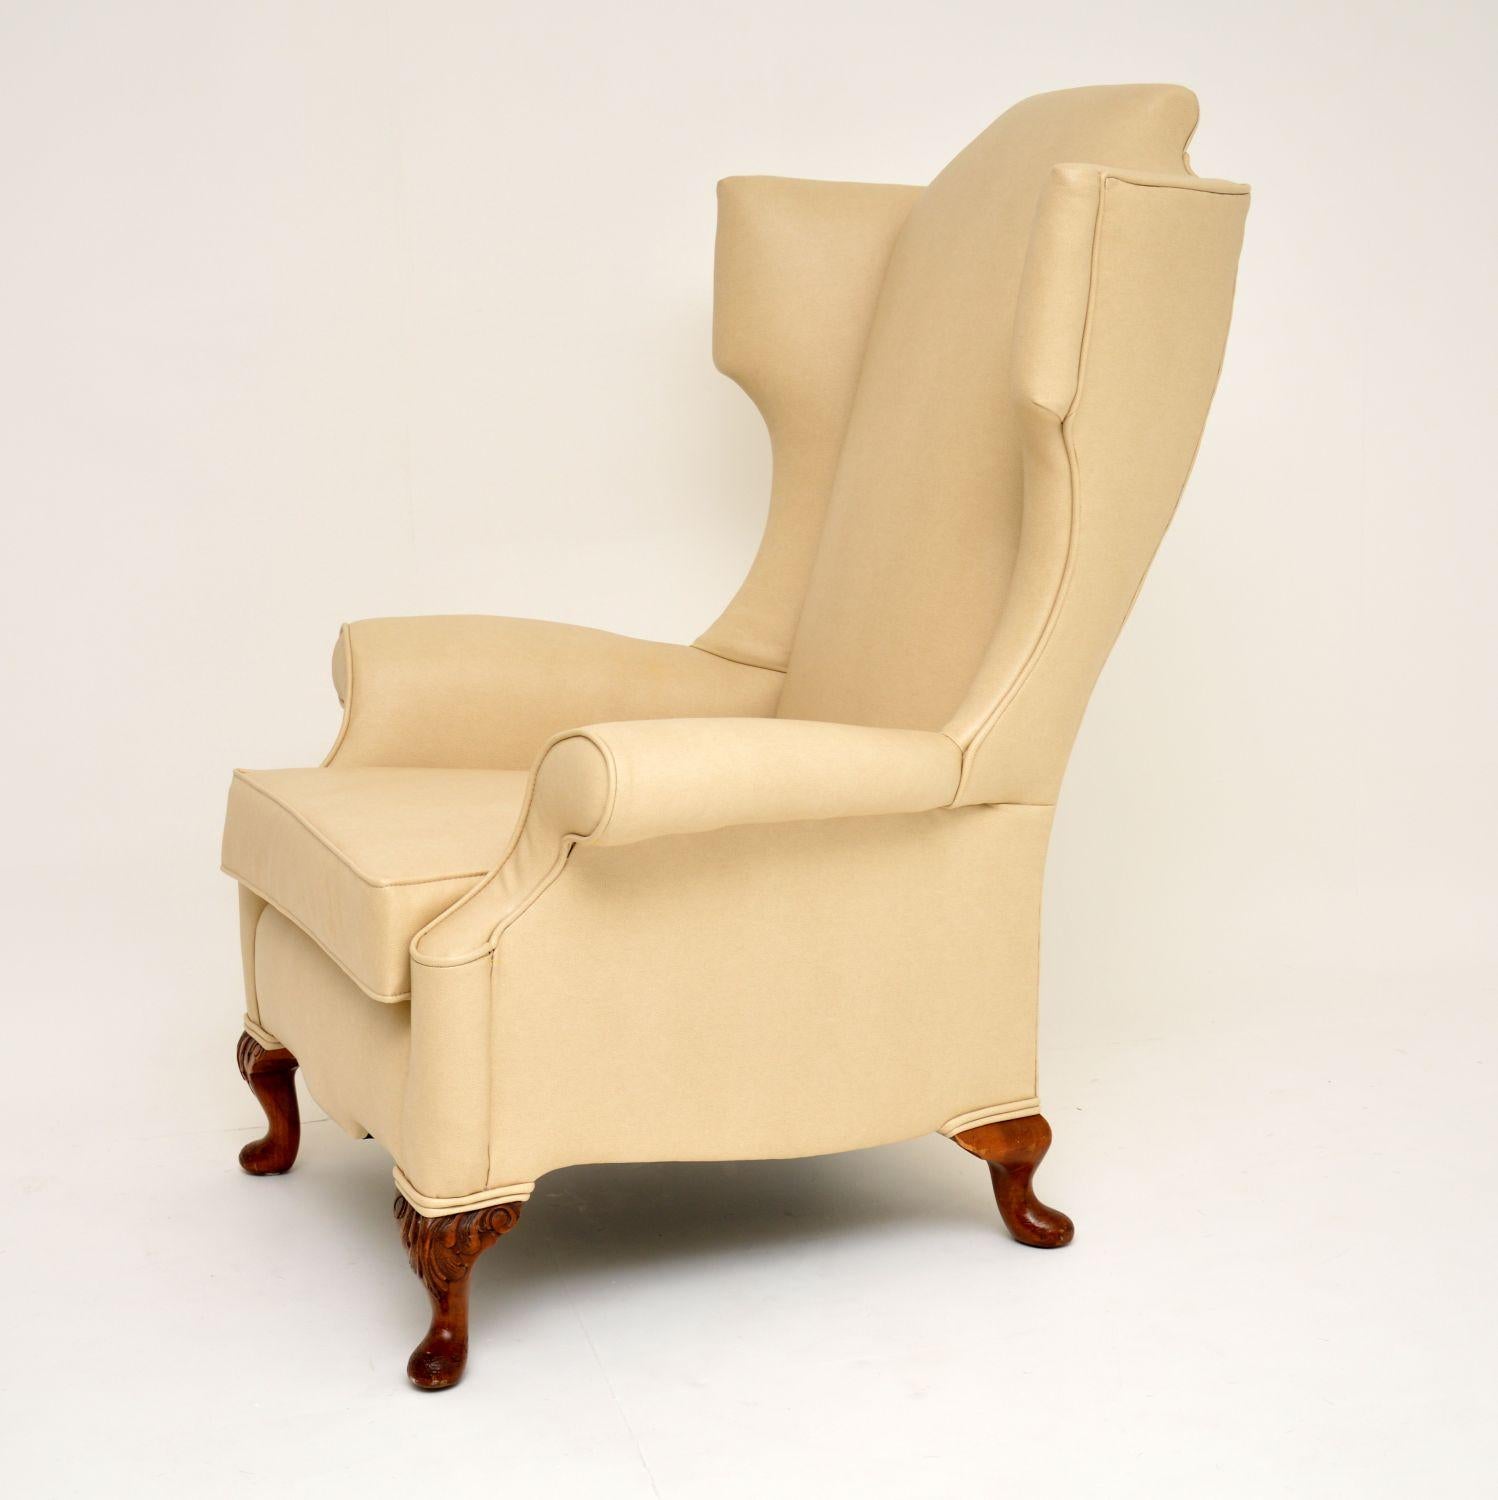 This antique Queen Anne style wing armchair is extremely comfortable with good back support & generous proportions.

It’s just been re-upholstered in a top quality imitation textured leather, which has a lovely soft feel & actually feels like